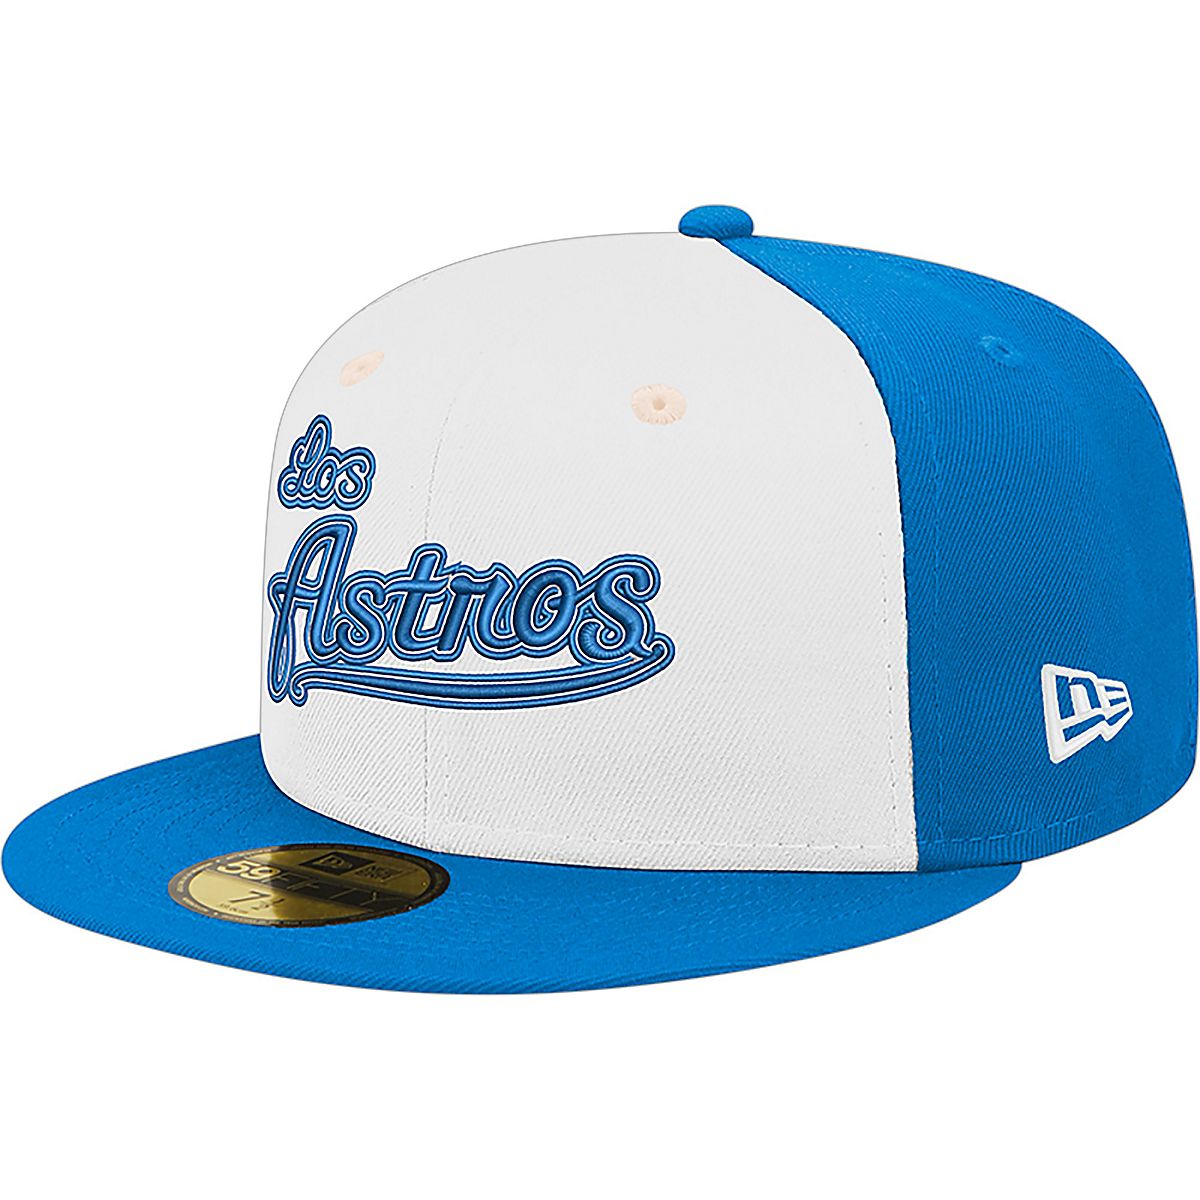  MLB Atlanta Braves Light Royal with White 59FIFTY Fitted Cap :  Sports Fan Baseball Caps : Sports & Outdoors